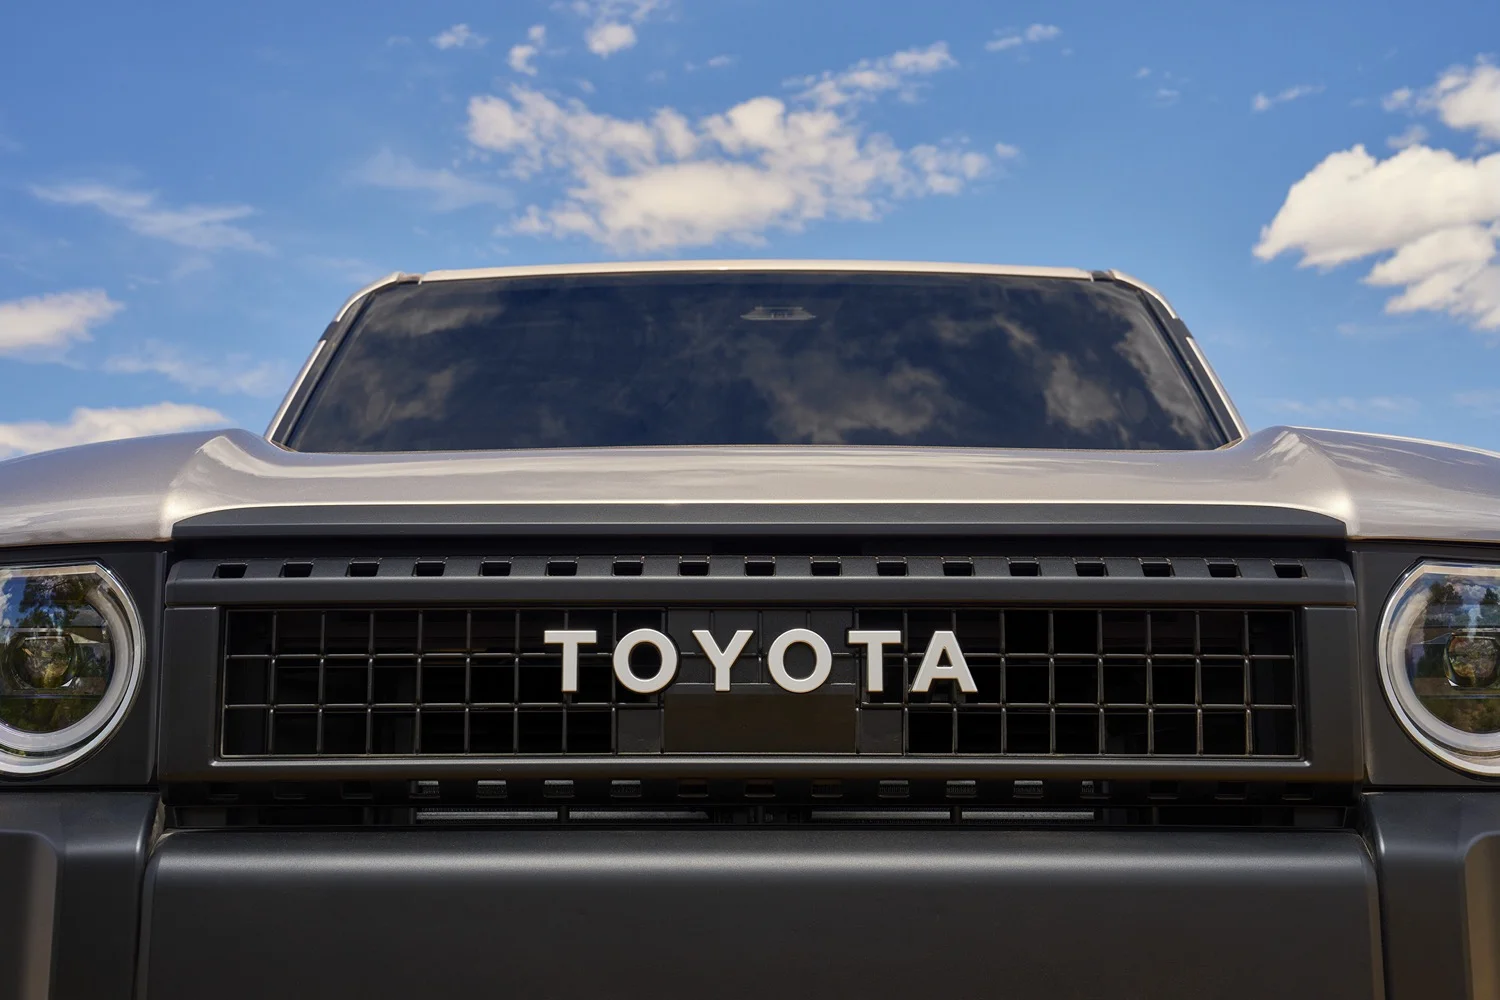 America's Getting A New Toyota Land Cruiser, but Might Not Want It